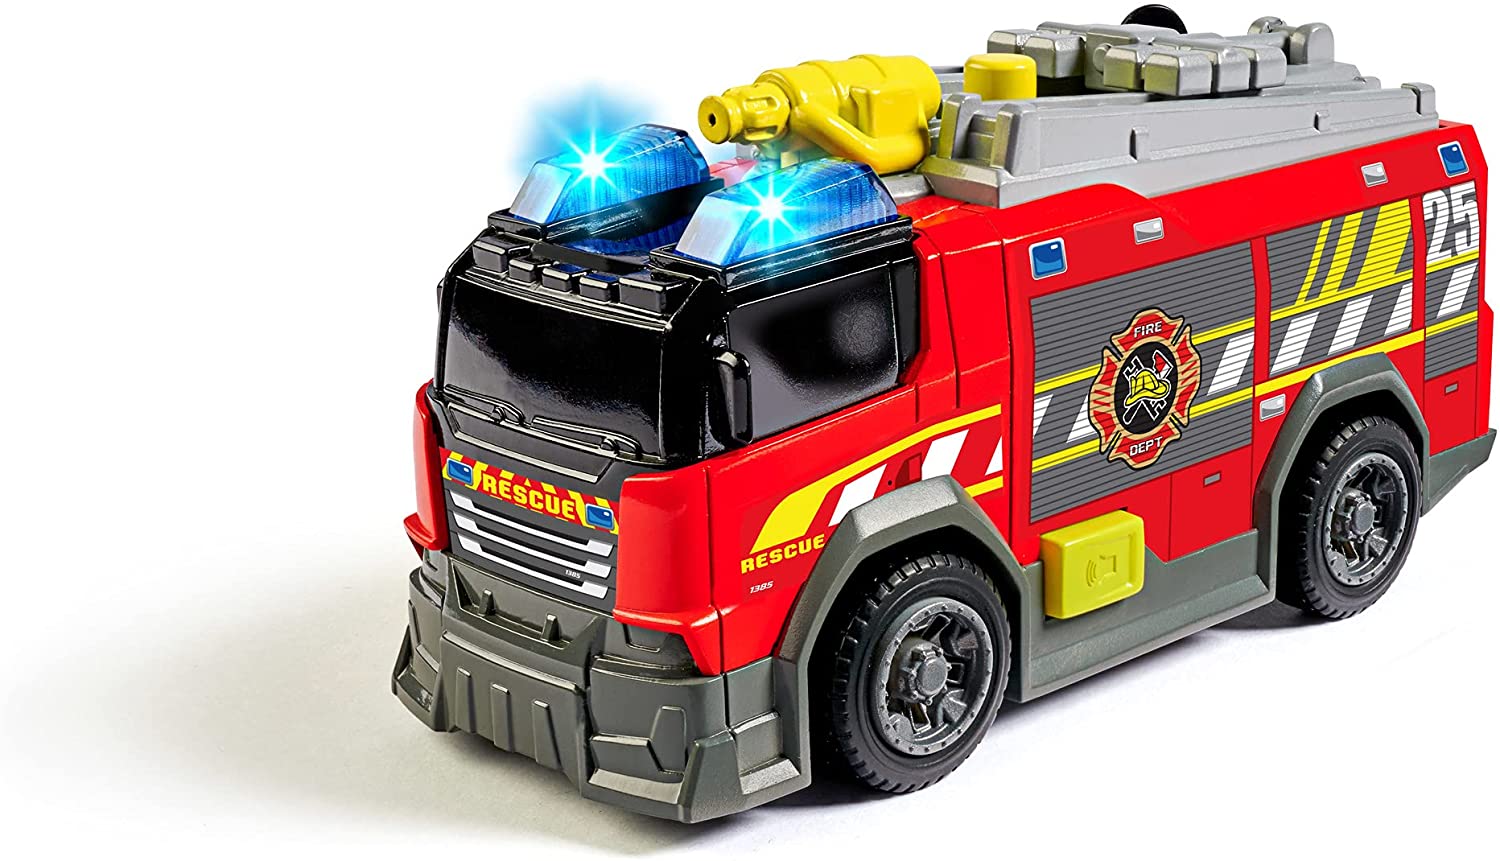 Masina - City Heroes - Fire Car, 15 cm | Dickie Toys